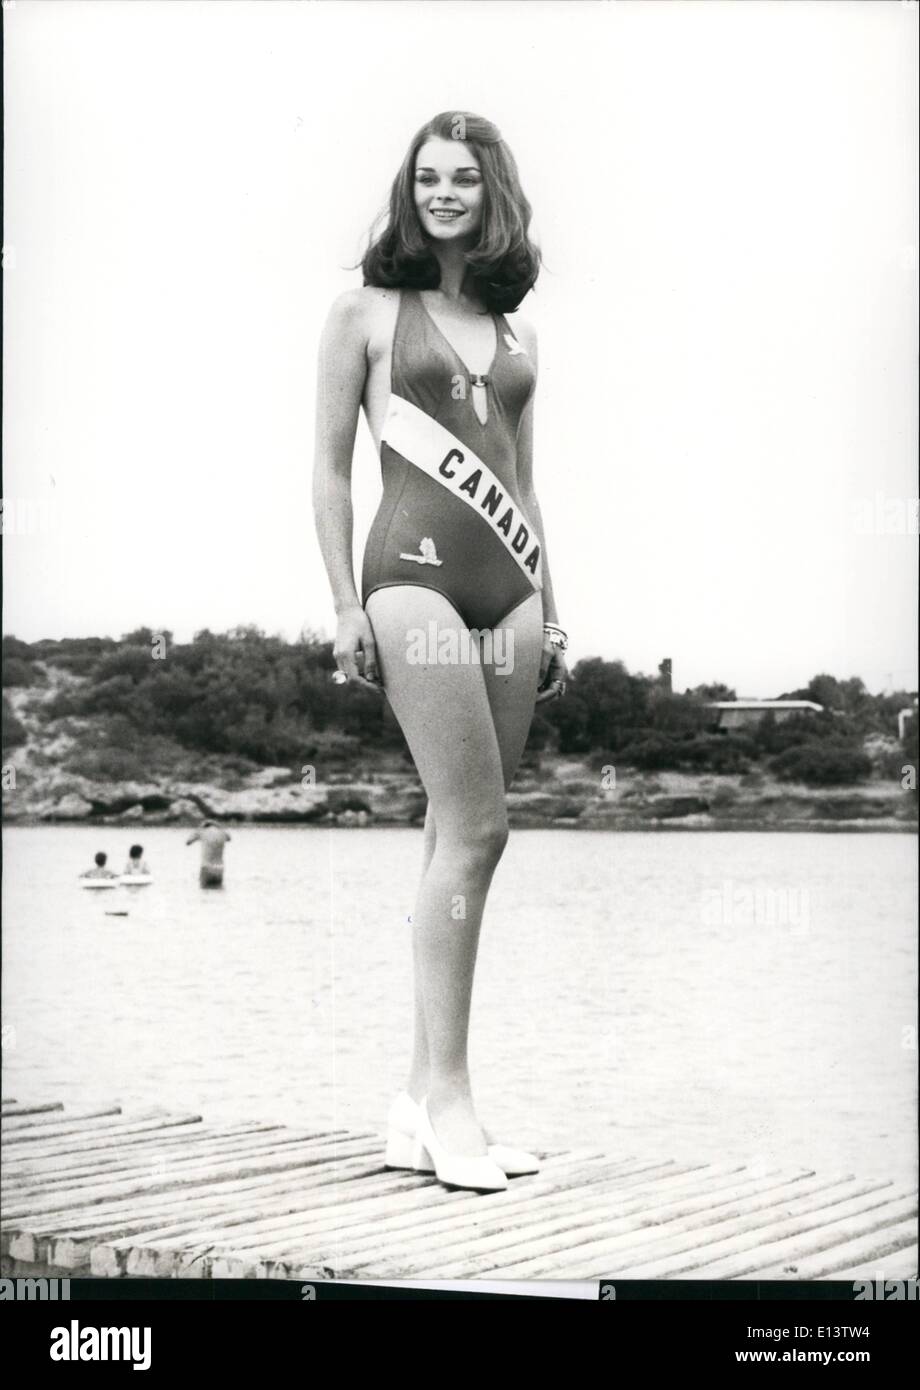 Mar. 27, 2012 - Biographical data on Miss Canada: Name: Deborah Ducharme Hometown: Ancaster, Ontario Canada Brithdate: May 23, 1953 Occupation: Model Education: Crossley Secondary School Language Spoken: English Life ambition: to further my career. Stock Photo